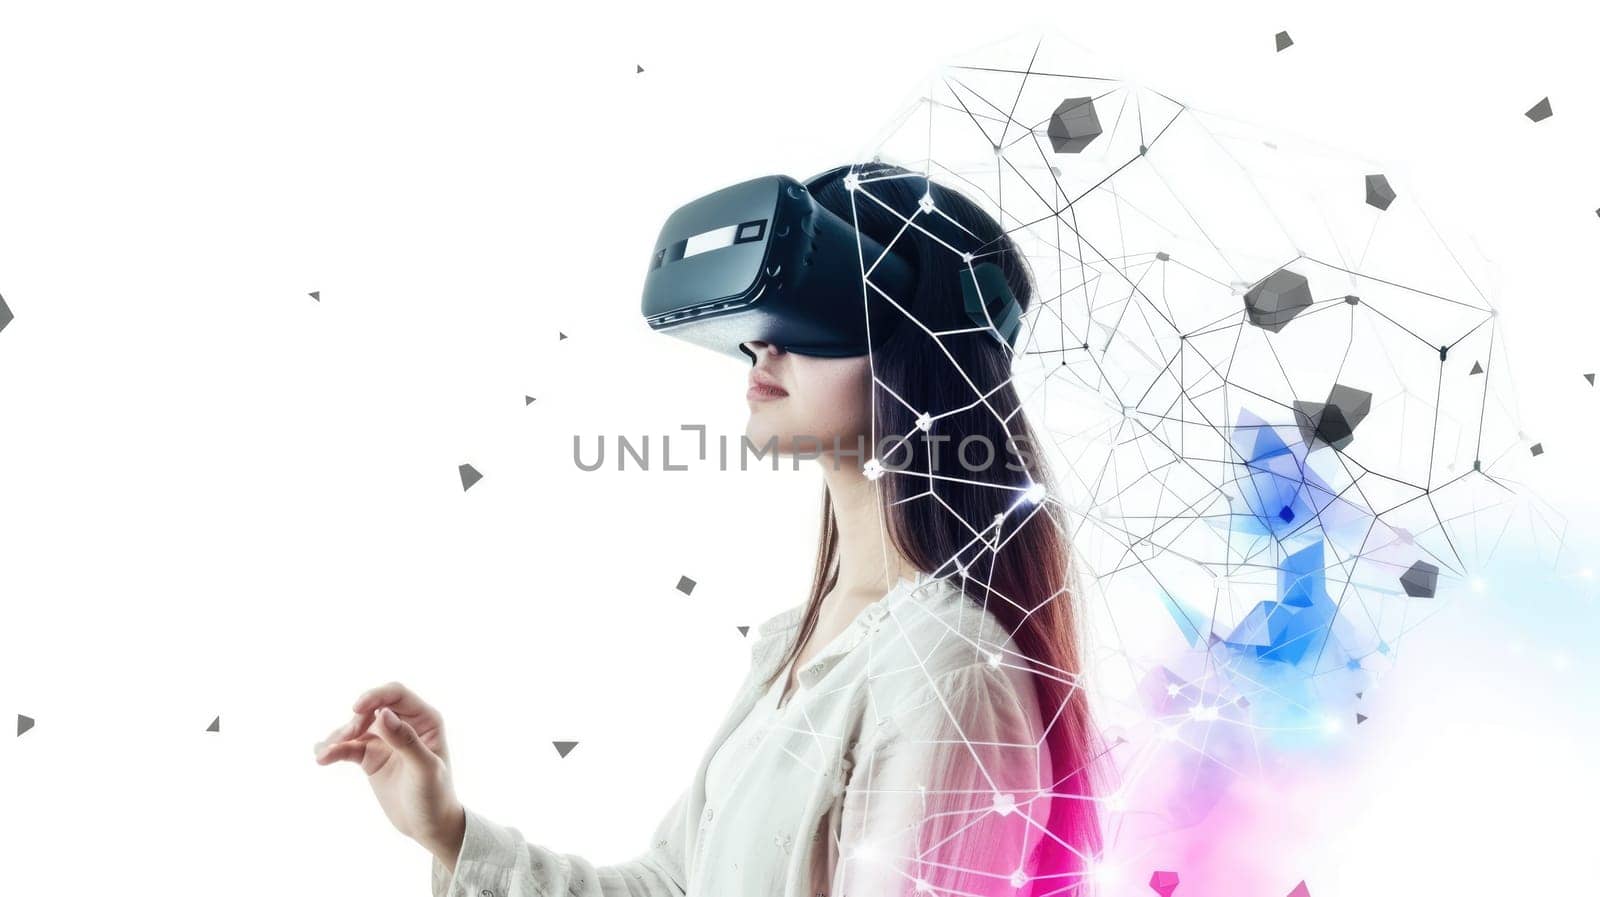 A woman interacts with a virtual reality interface, manipulating geometric shapes in a simulated environment for an advanced digital experience. AIG41